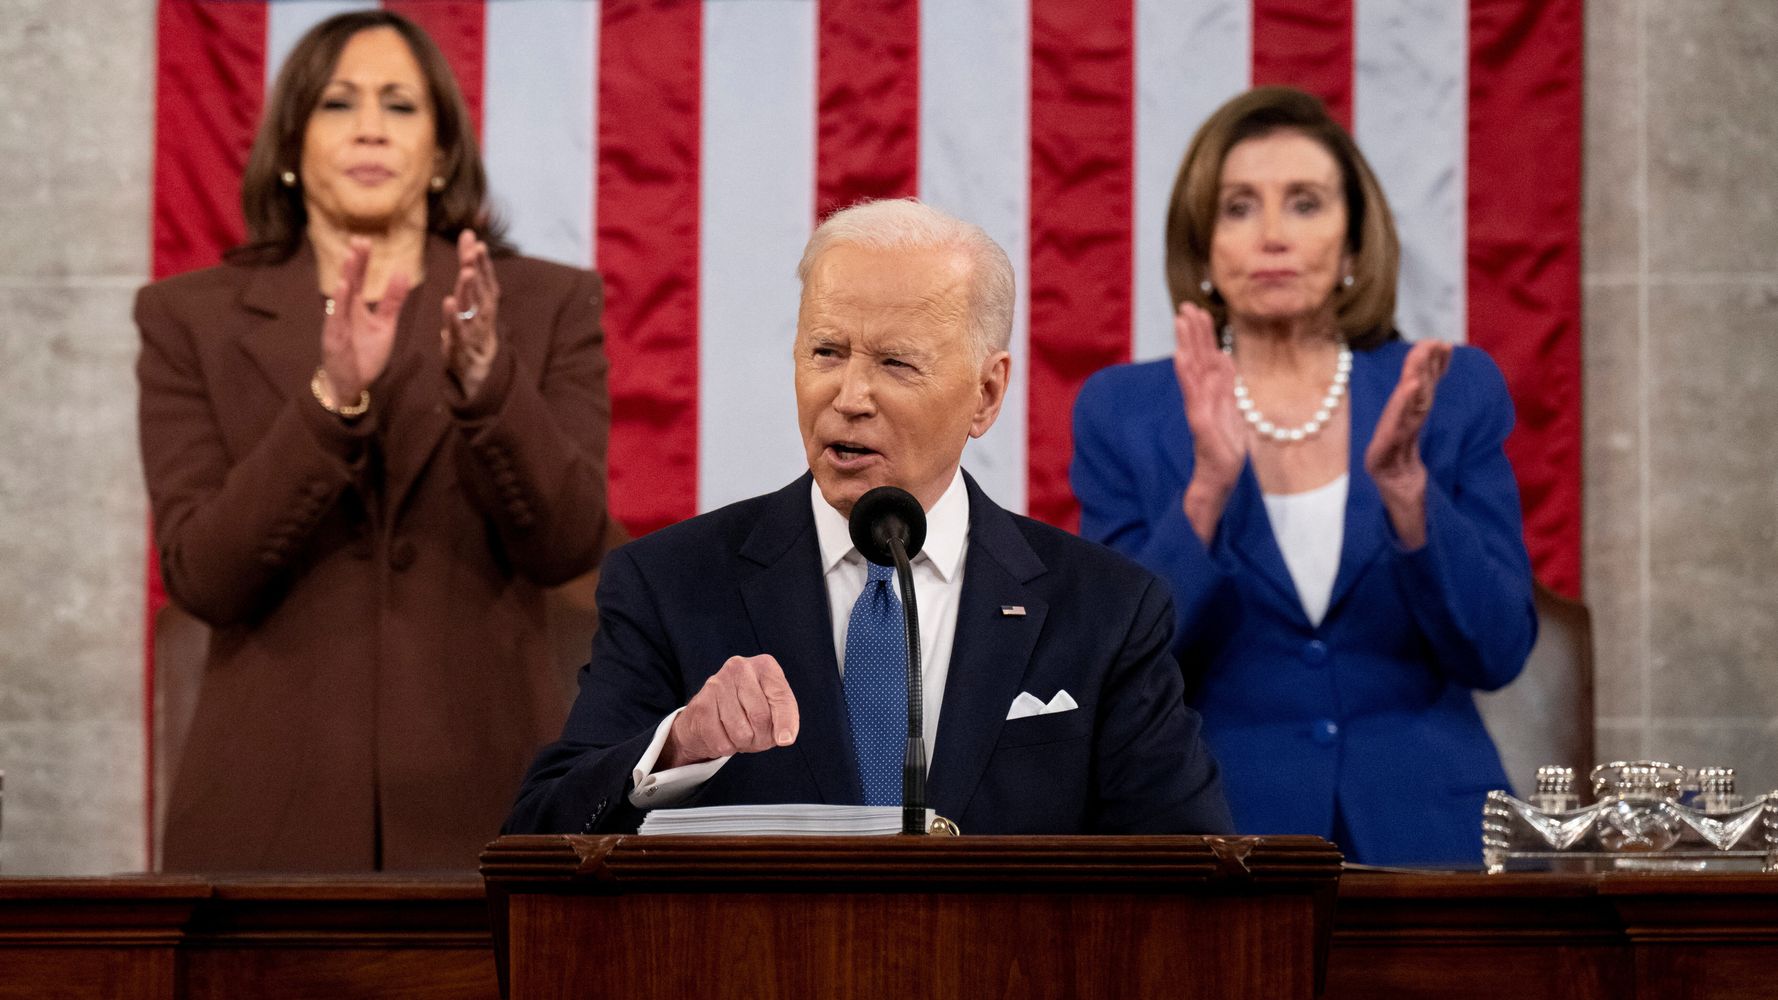 Biden Says Energy Plan Will Fight Climate Change, Inflation In State Of The Union Speech | HuffPost Latest News